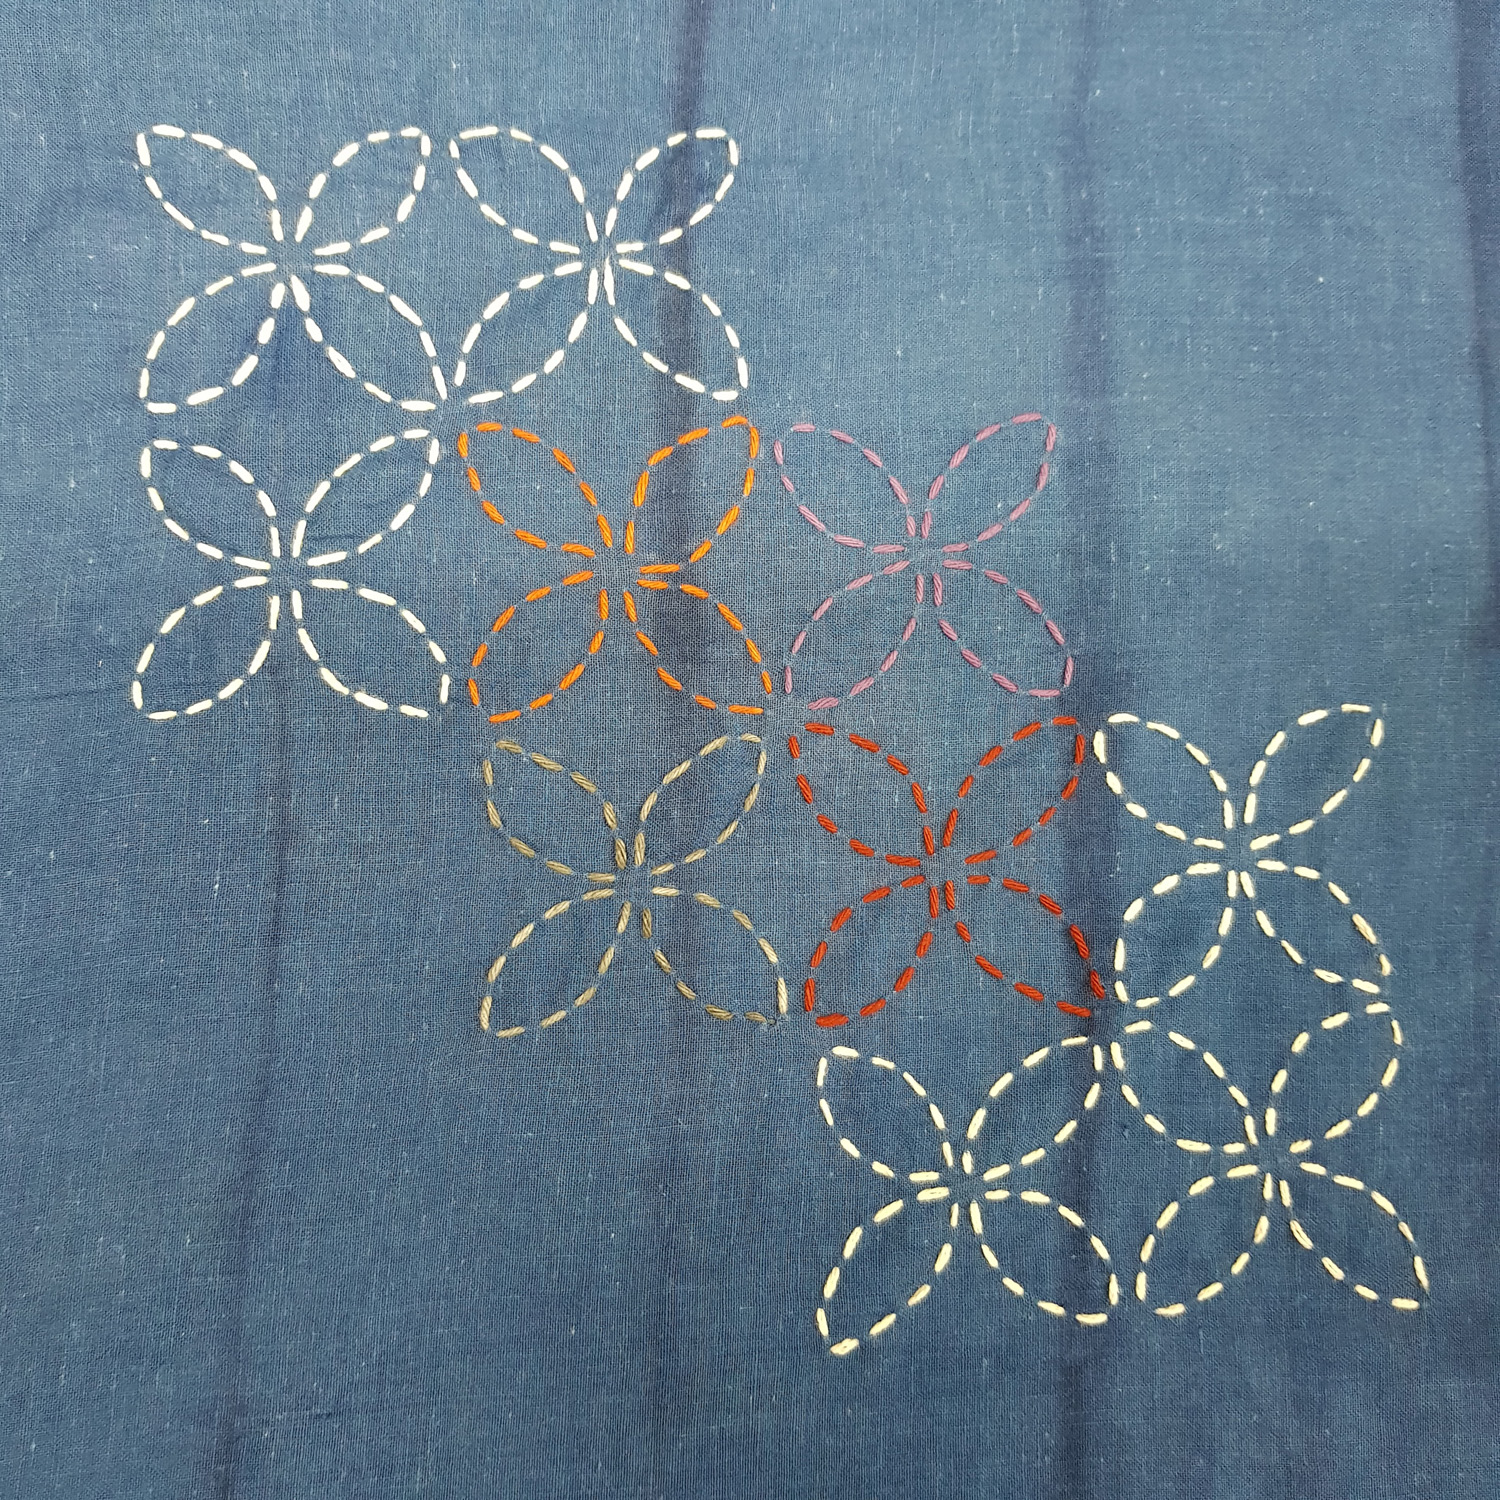 How is sashiko different from embroidery?